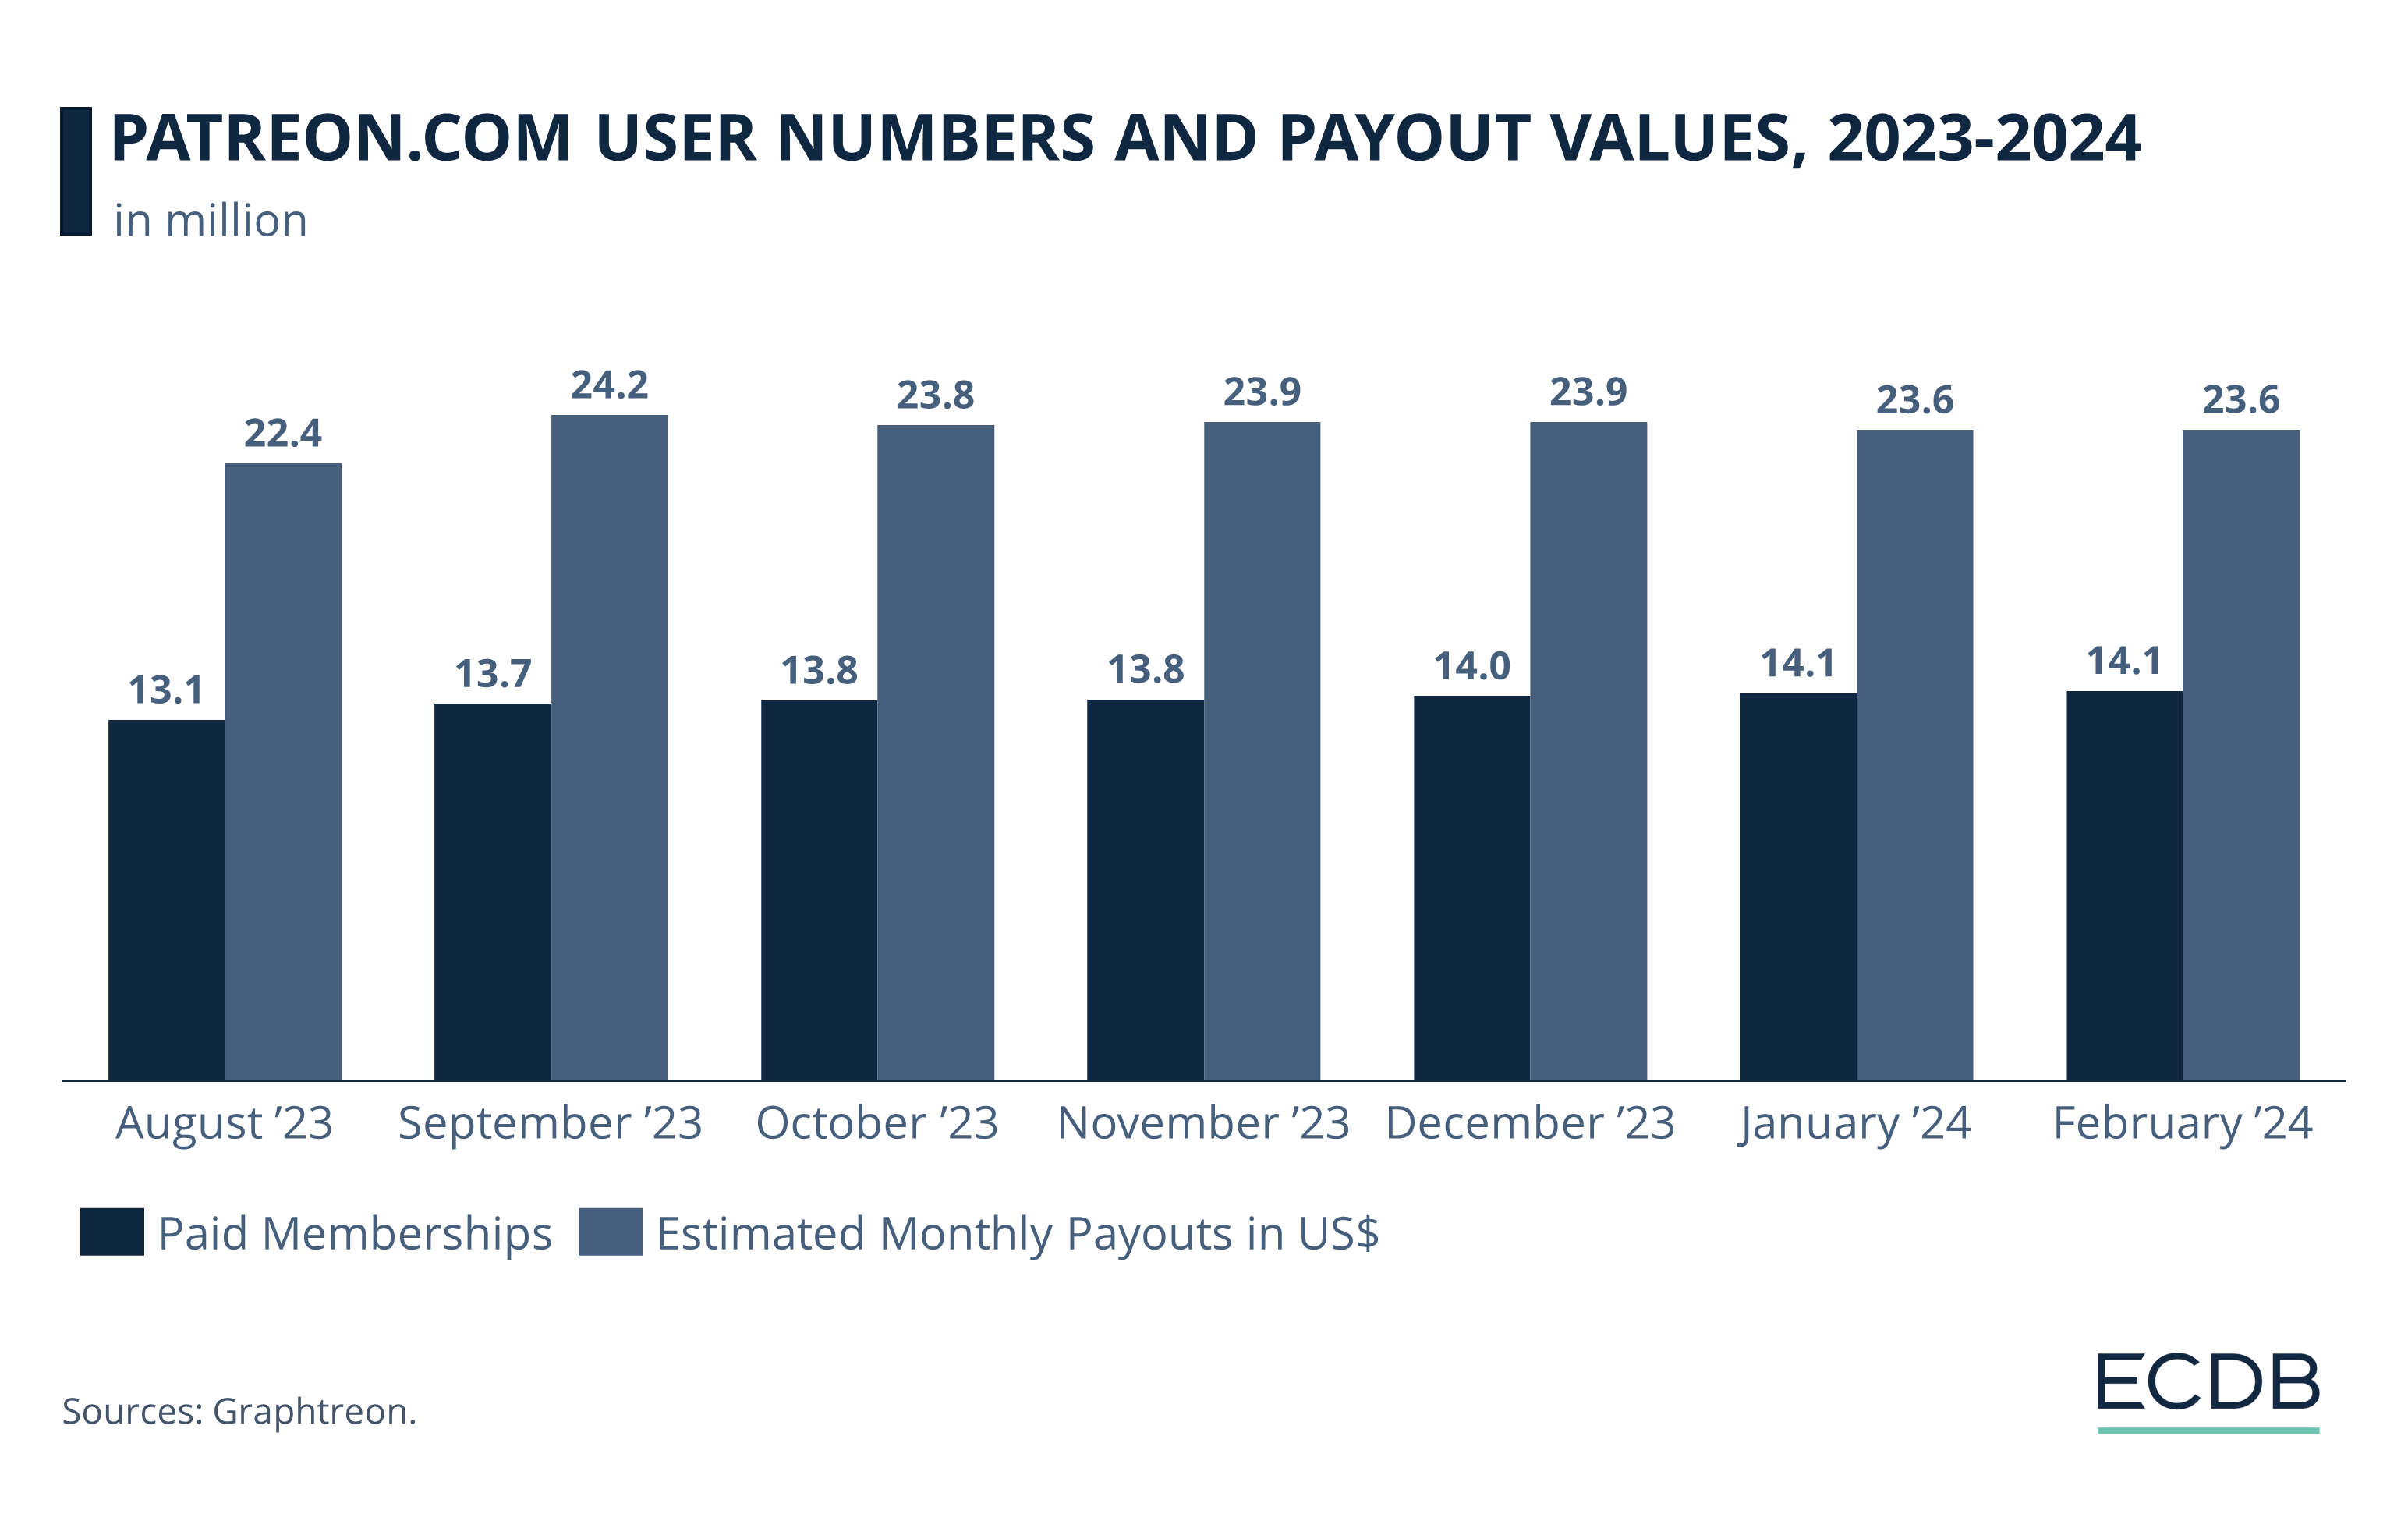 Patreon.com User Numbers and Payout Values, 2023-2024